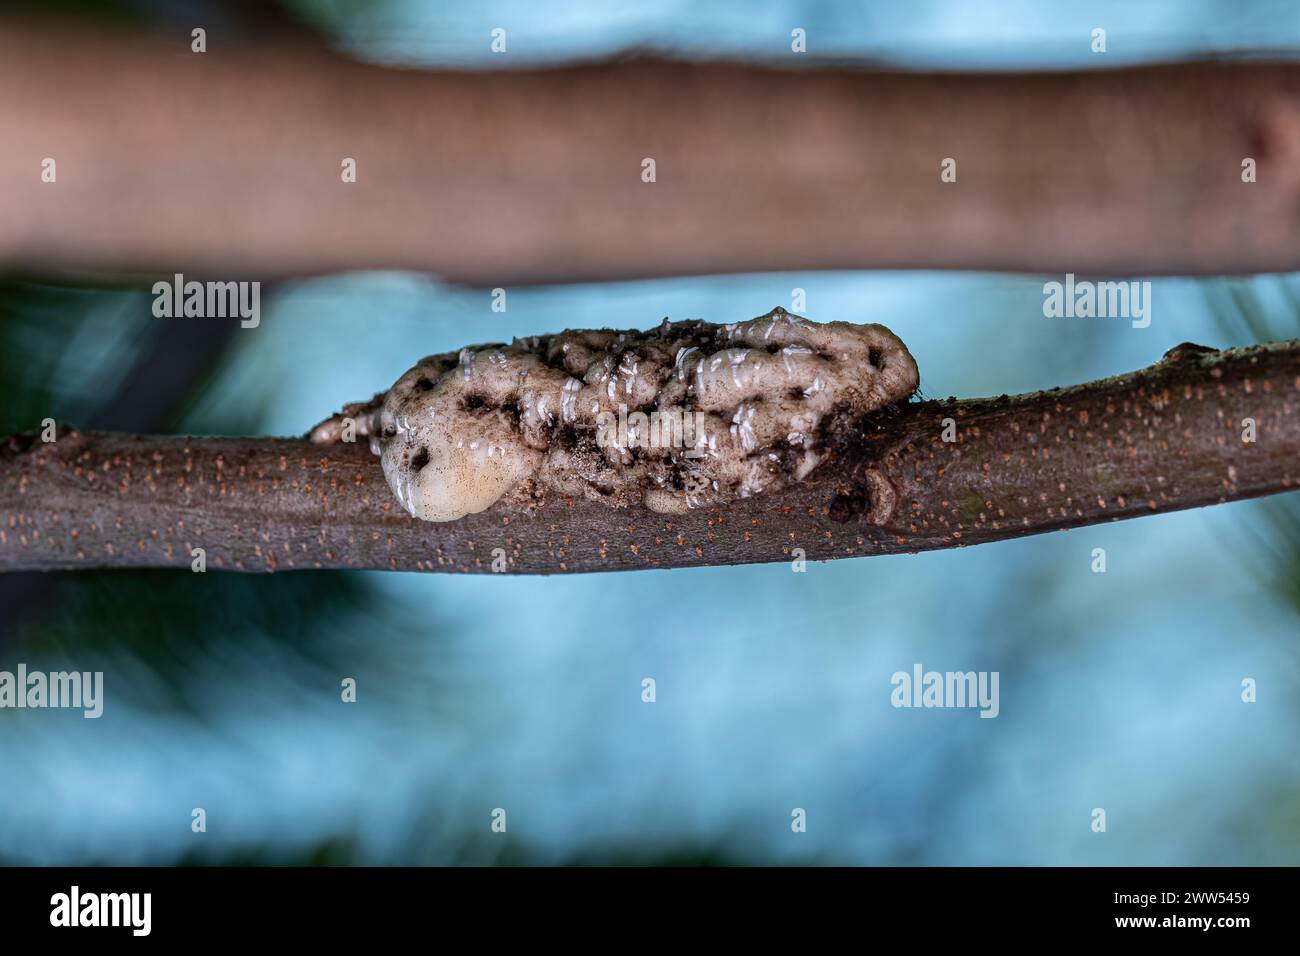 White Tortoise Scales of the Family Coccidae Stock Photo